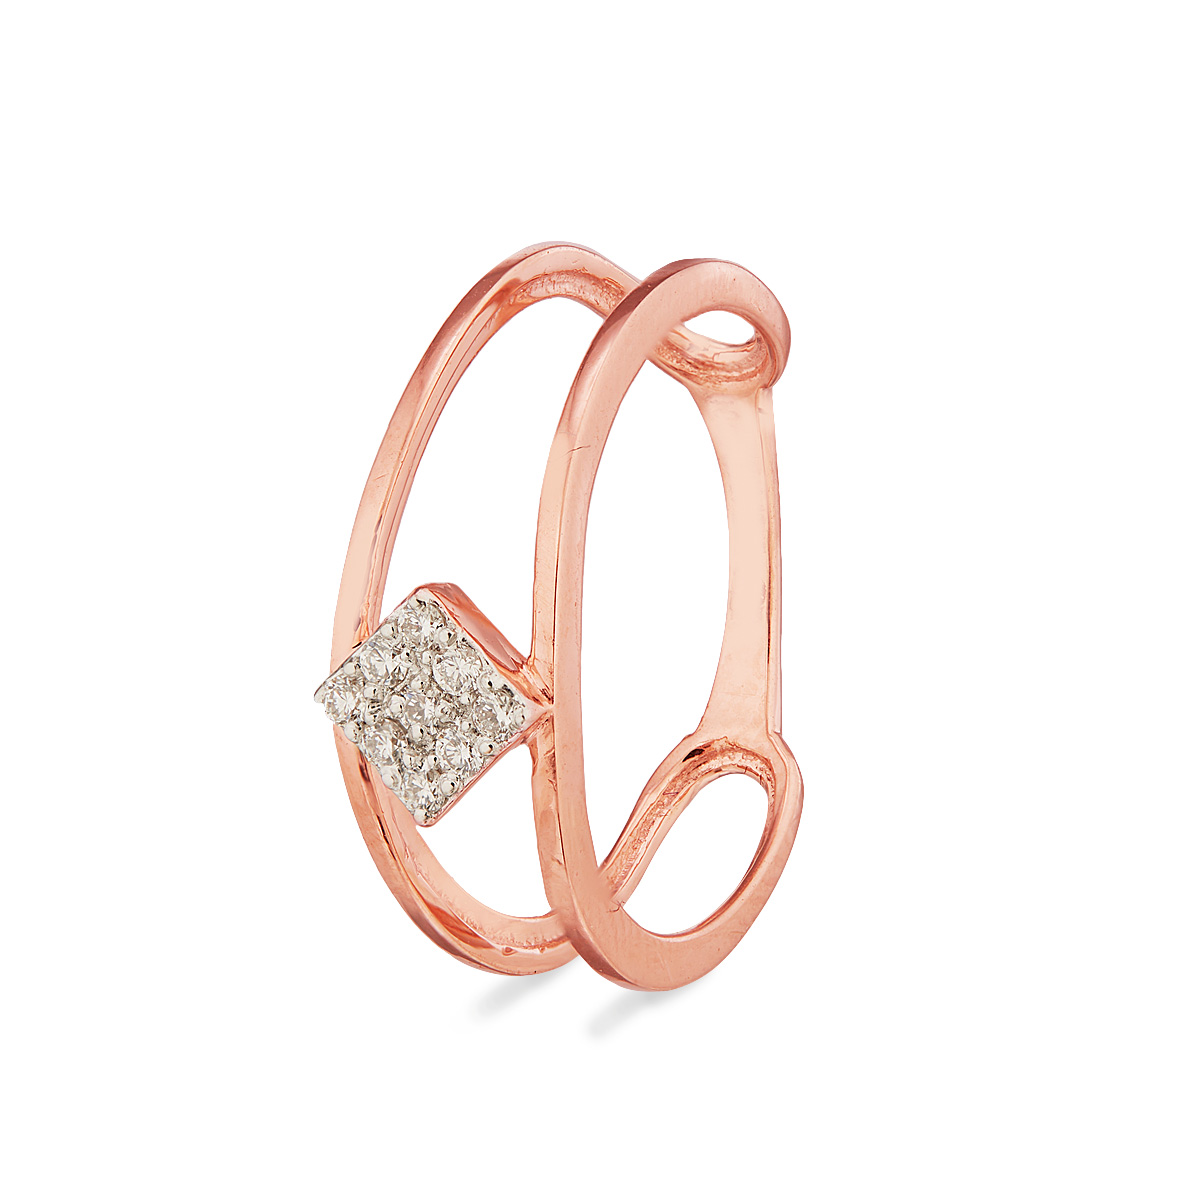 Inclined Squad-centered Ring